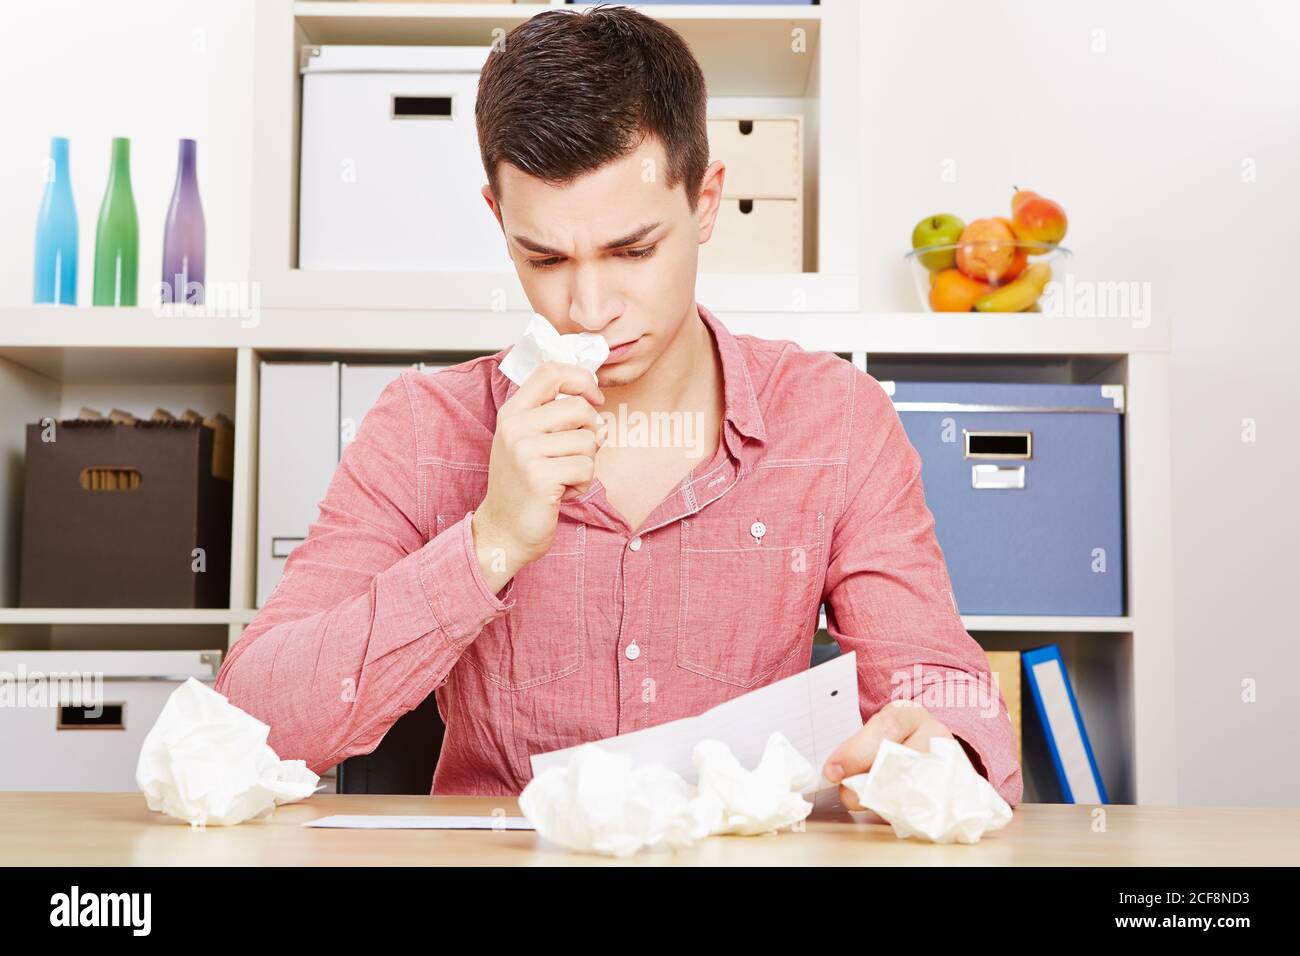 Sad teenage boy cries while reading a letter with handkerchiefs Stock Photo